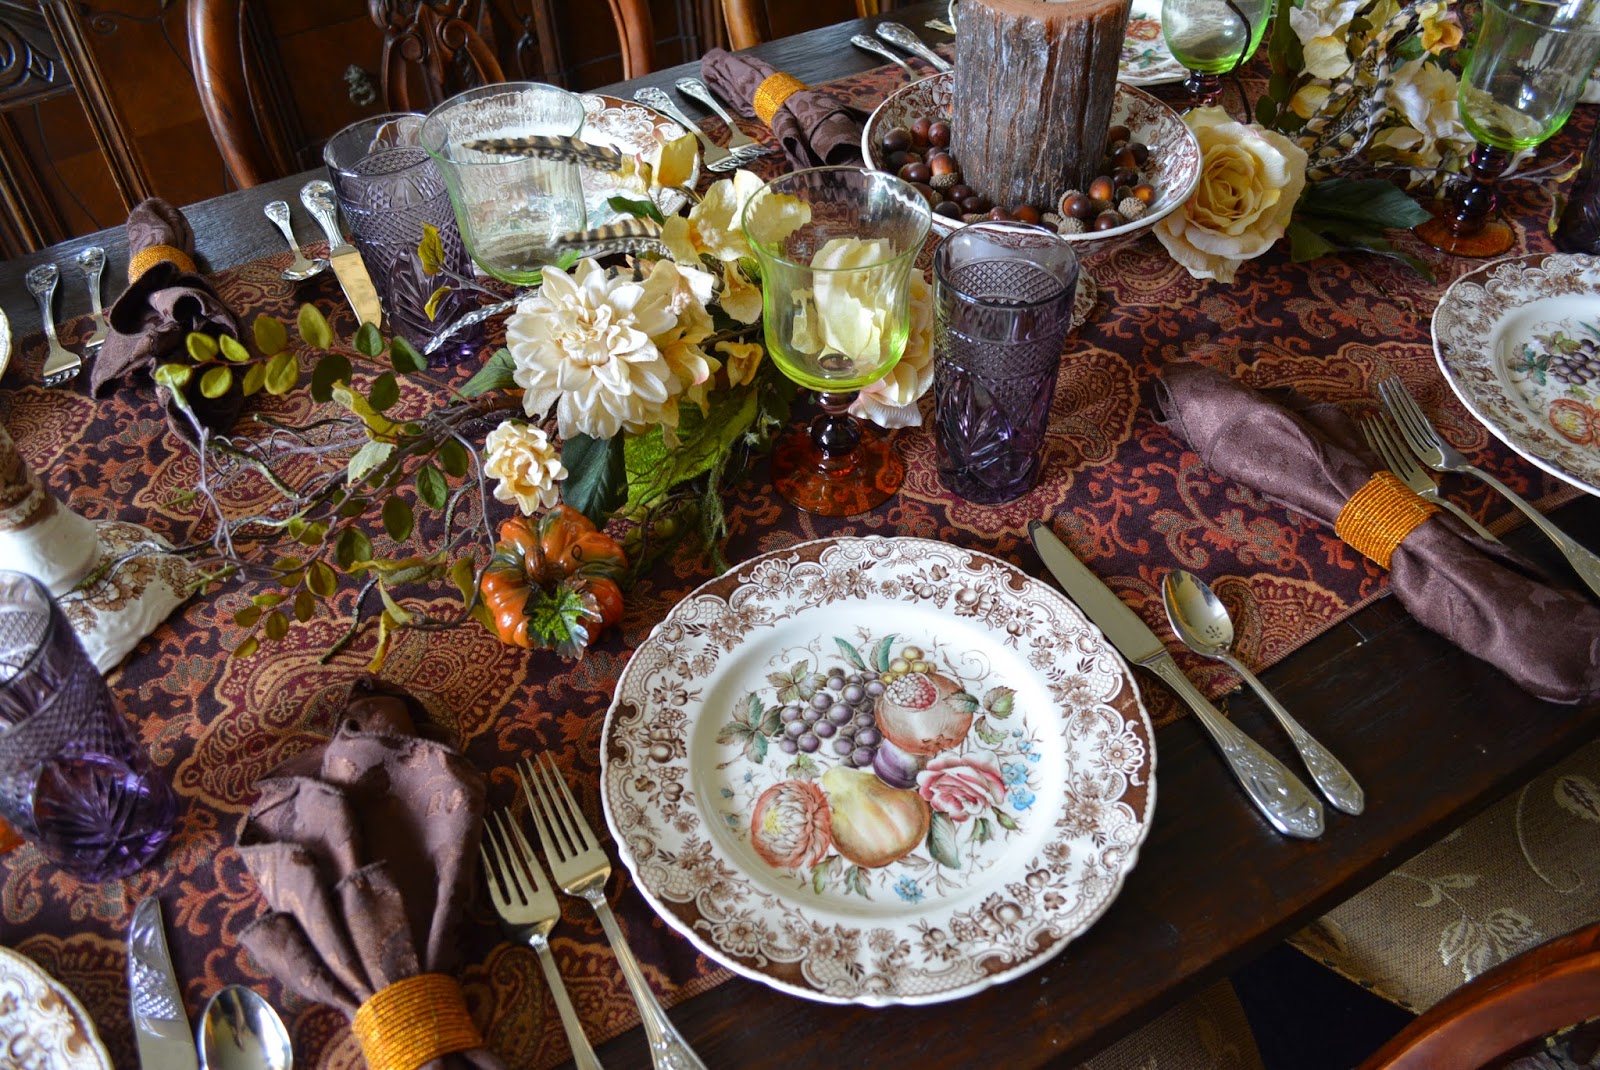 Nancy's Daily Dish: Johnson Brothers Harvest Fruit Tablescape